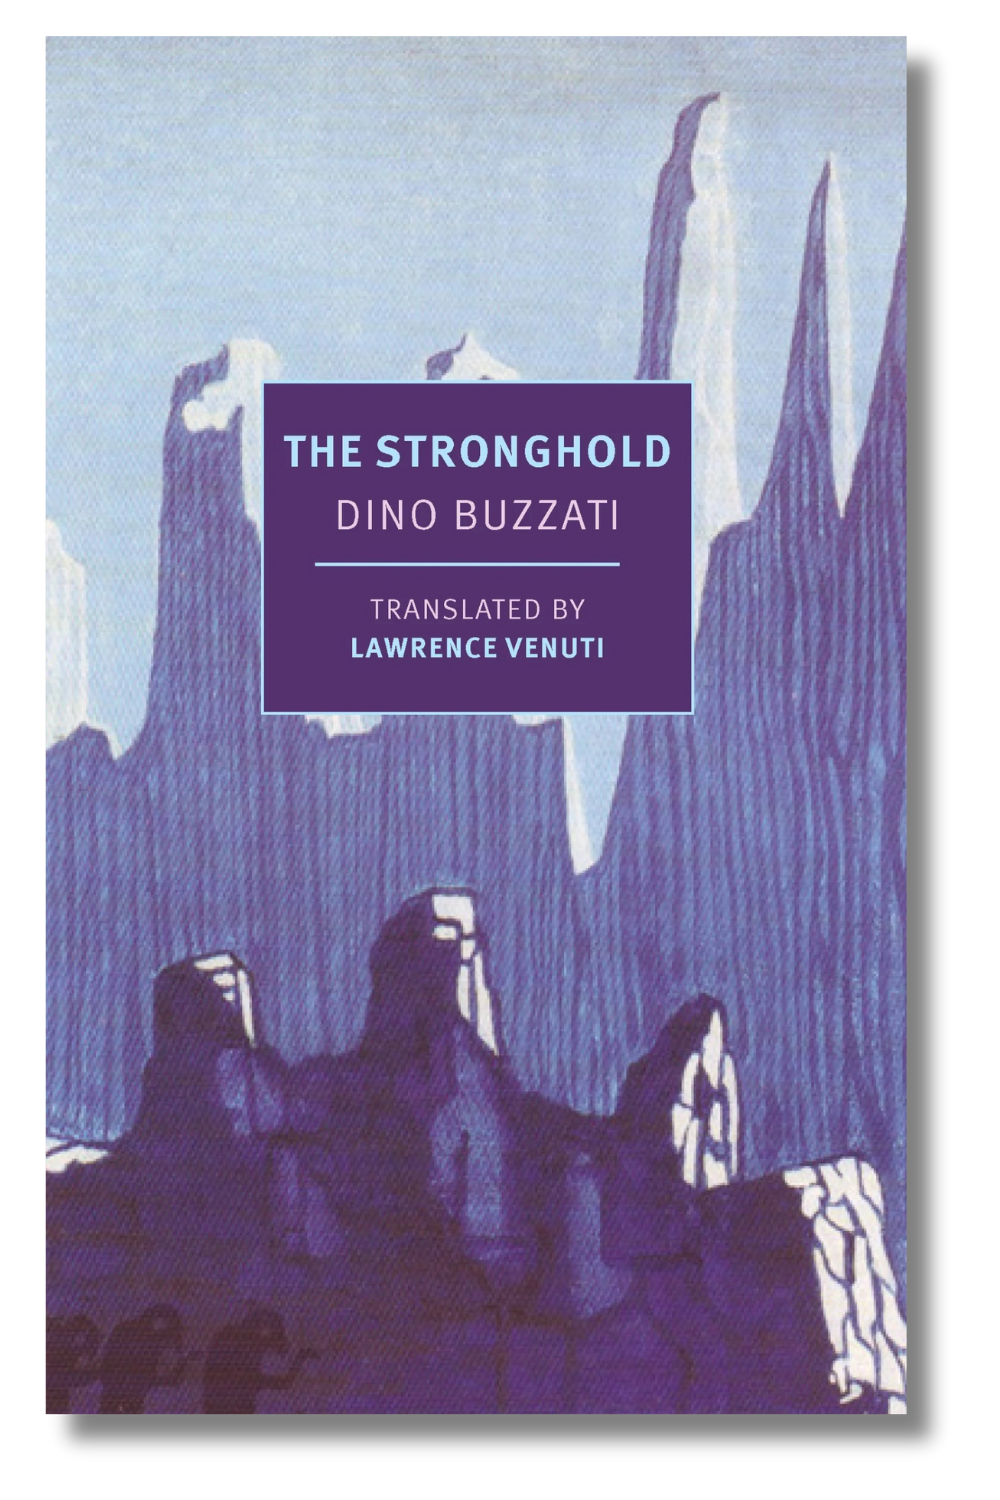 The cover of "The Stronghold" by Dino Buzzatti, translated by Lawrence Venuti